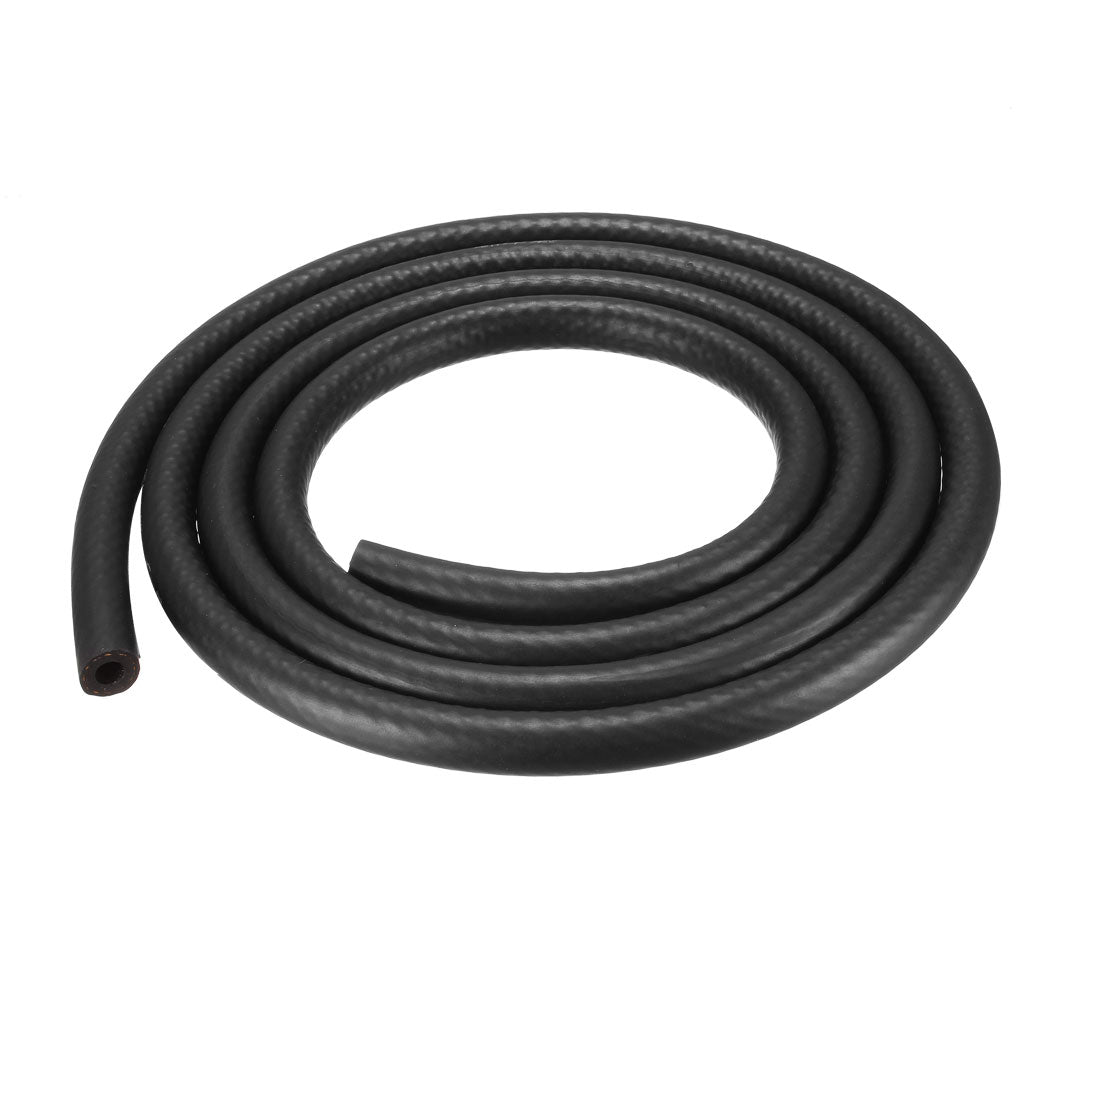 uxcell Uxcell Fuel Line Fuel Hose Rubber  6mm I.D.  1.8M/5.9FT  Diesel Petrol Hose Engine Pipe Tubing